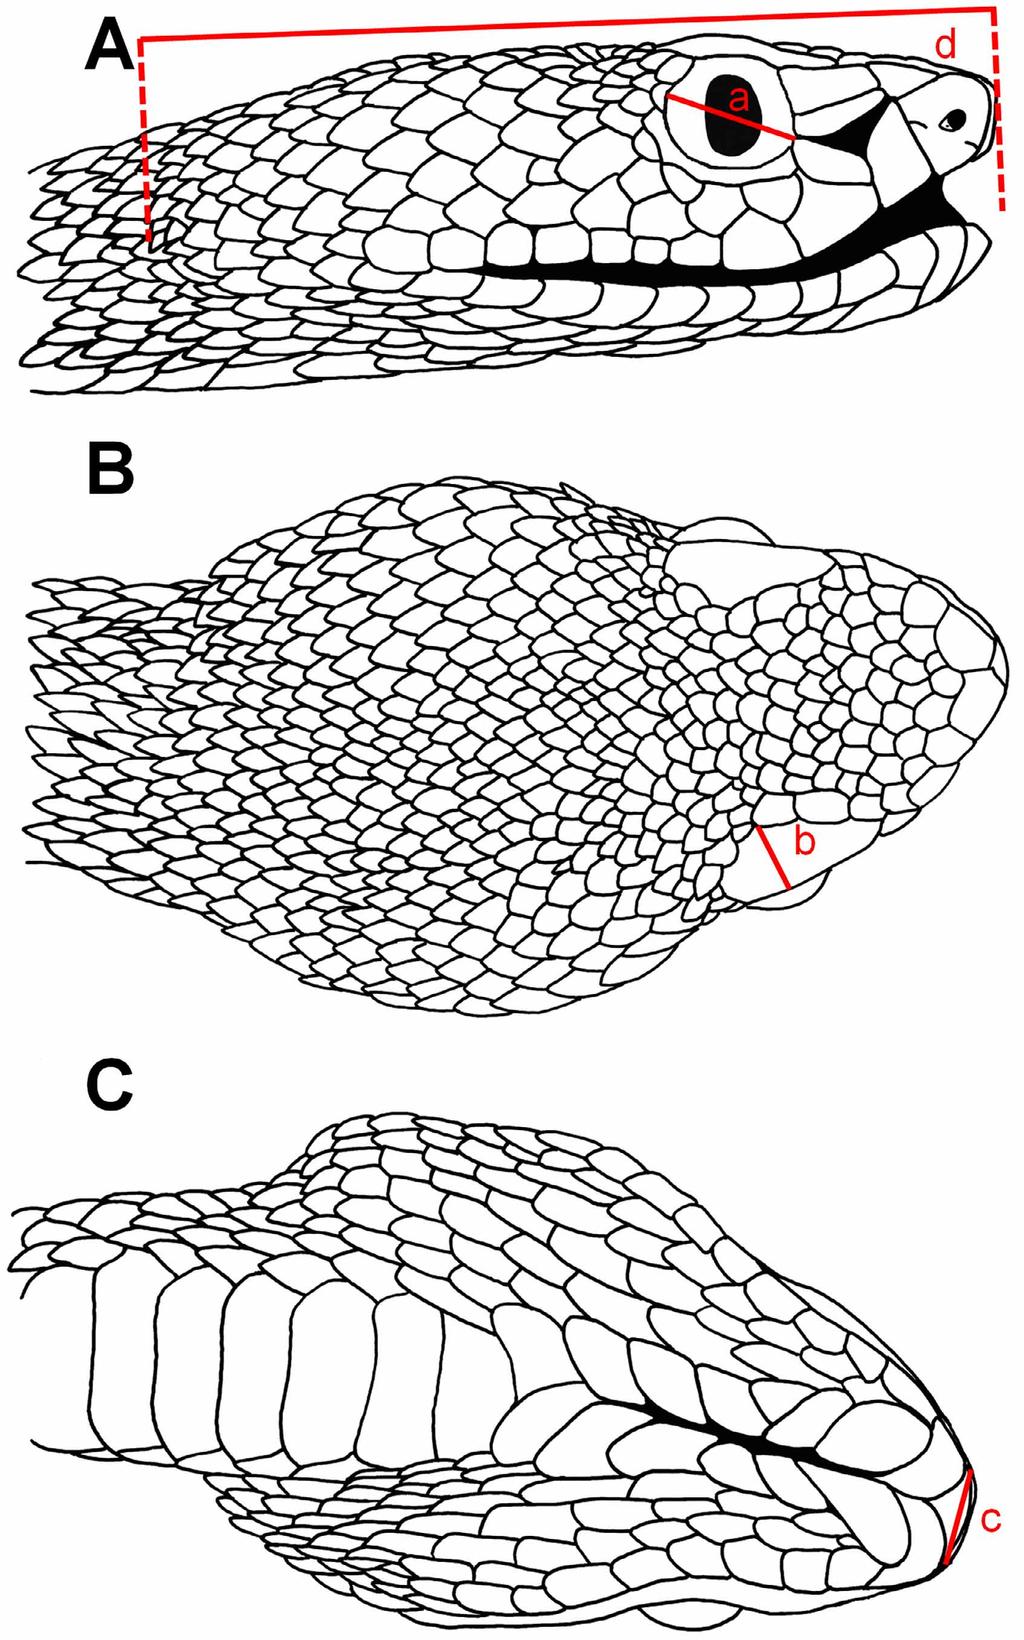 FIGURE 5. Line drawings of the head scalation of the holotype of Cryptelytrops rubeus sp. nov. (FMNH 262718).